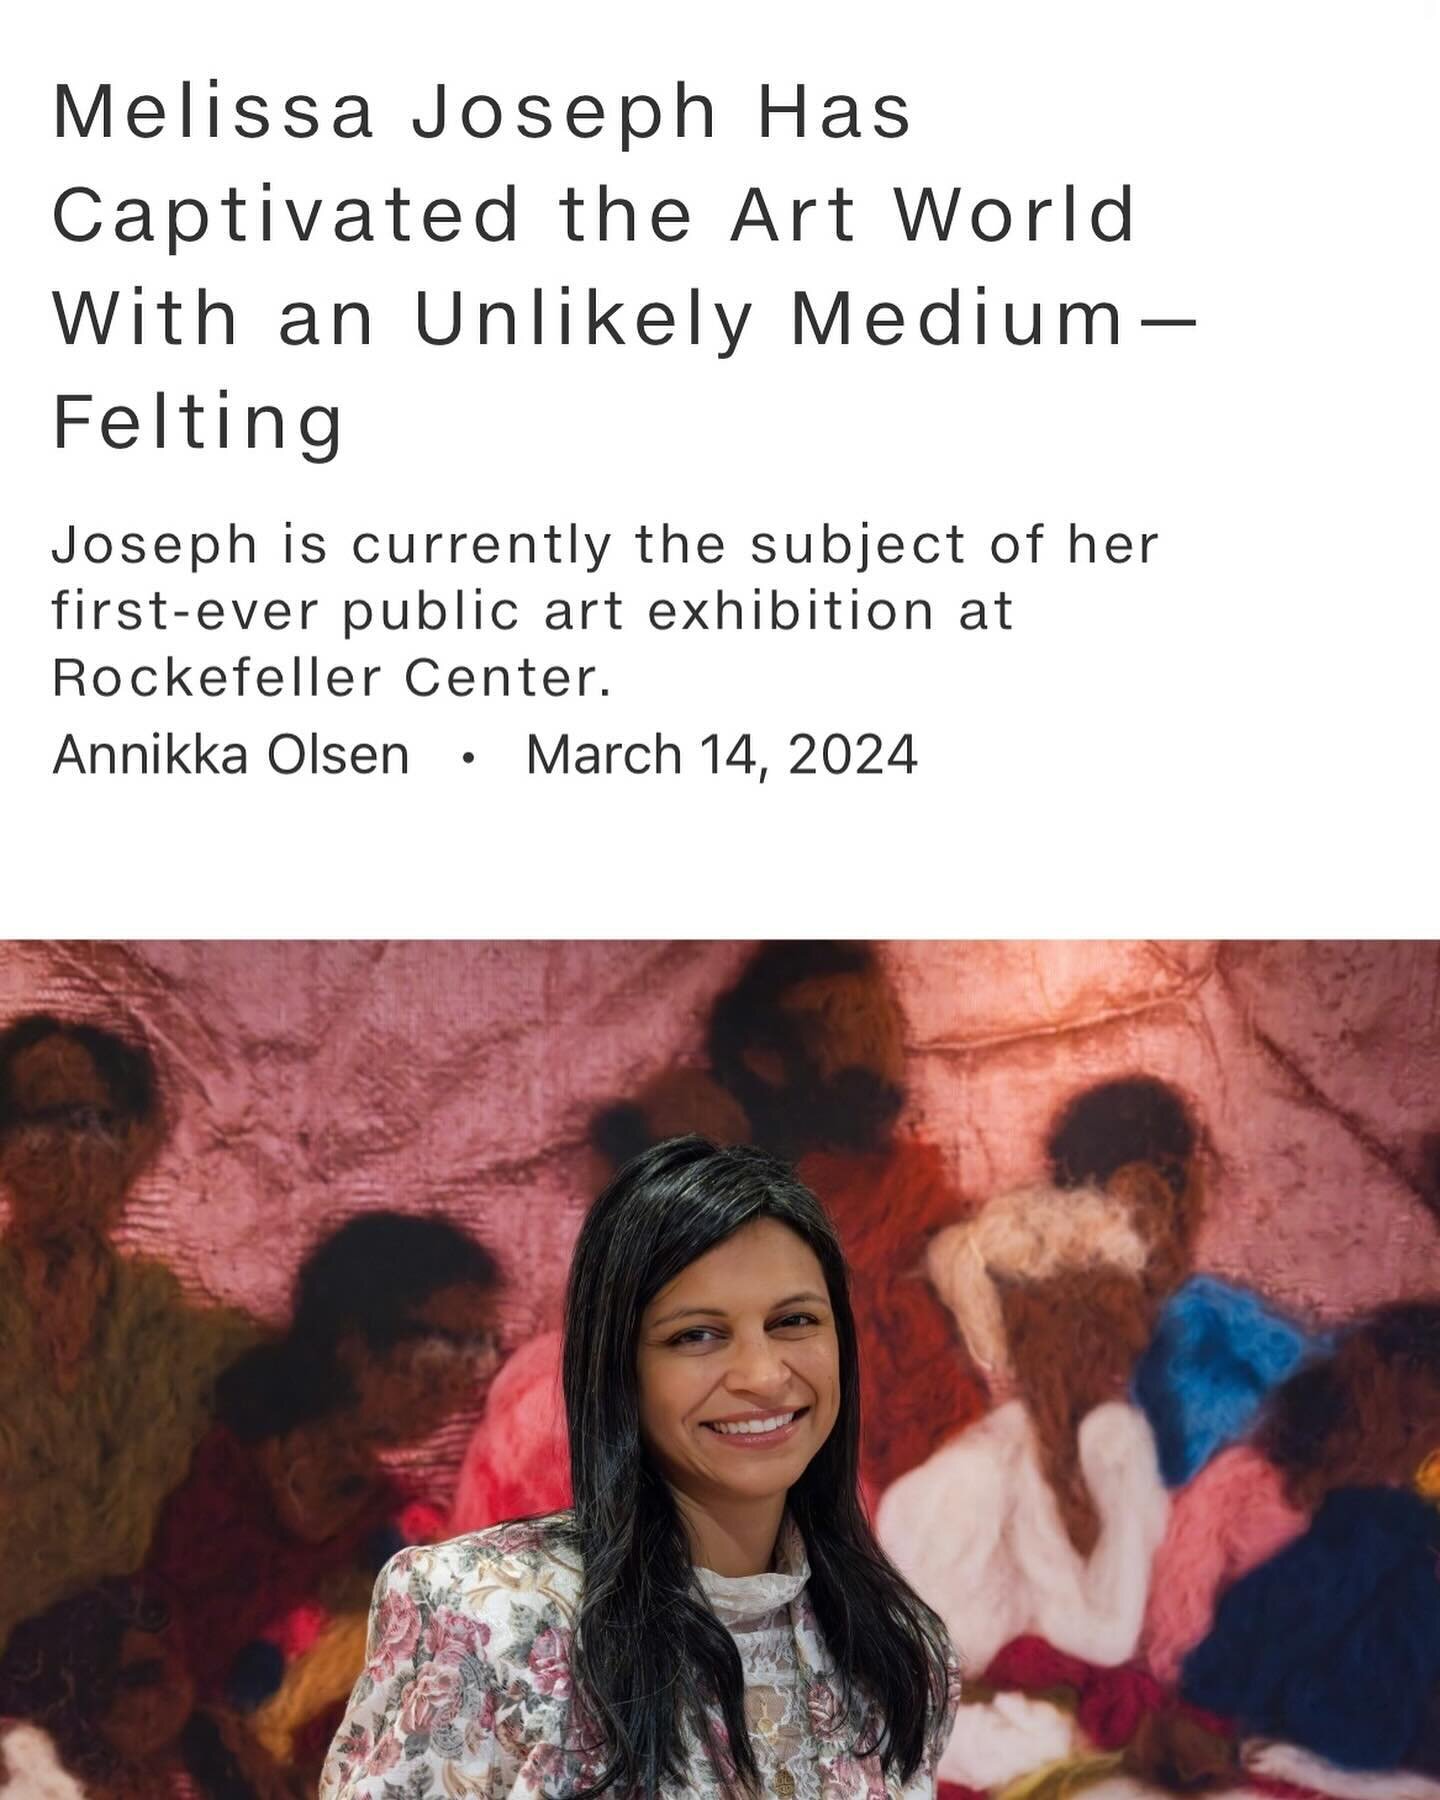 Learn more about Melissa Joseph&rsquo;s first-ever public art presentation @rockefellercenter within @annikkaolsen&rsquo;s fantastic article for @artnet, where the artist dives into her early inclination toward art and art-making as a child, familial